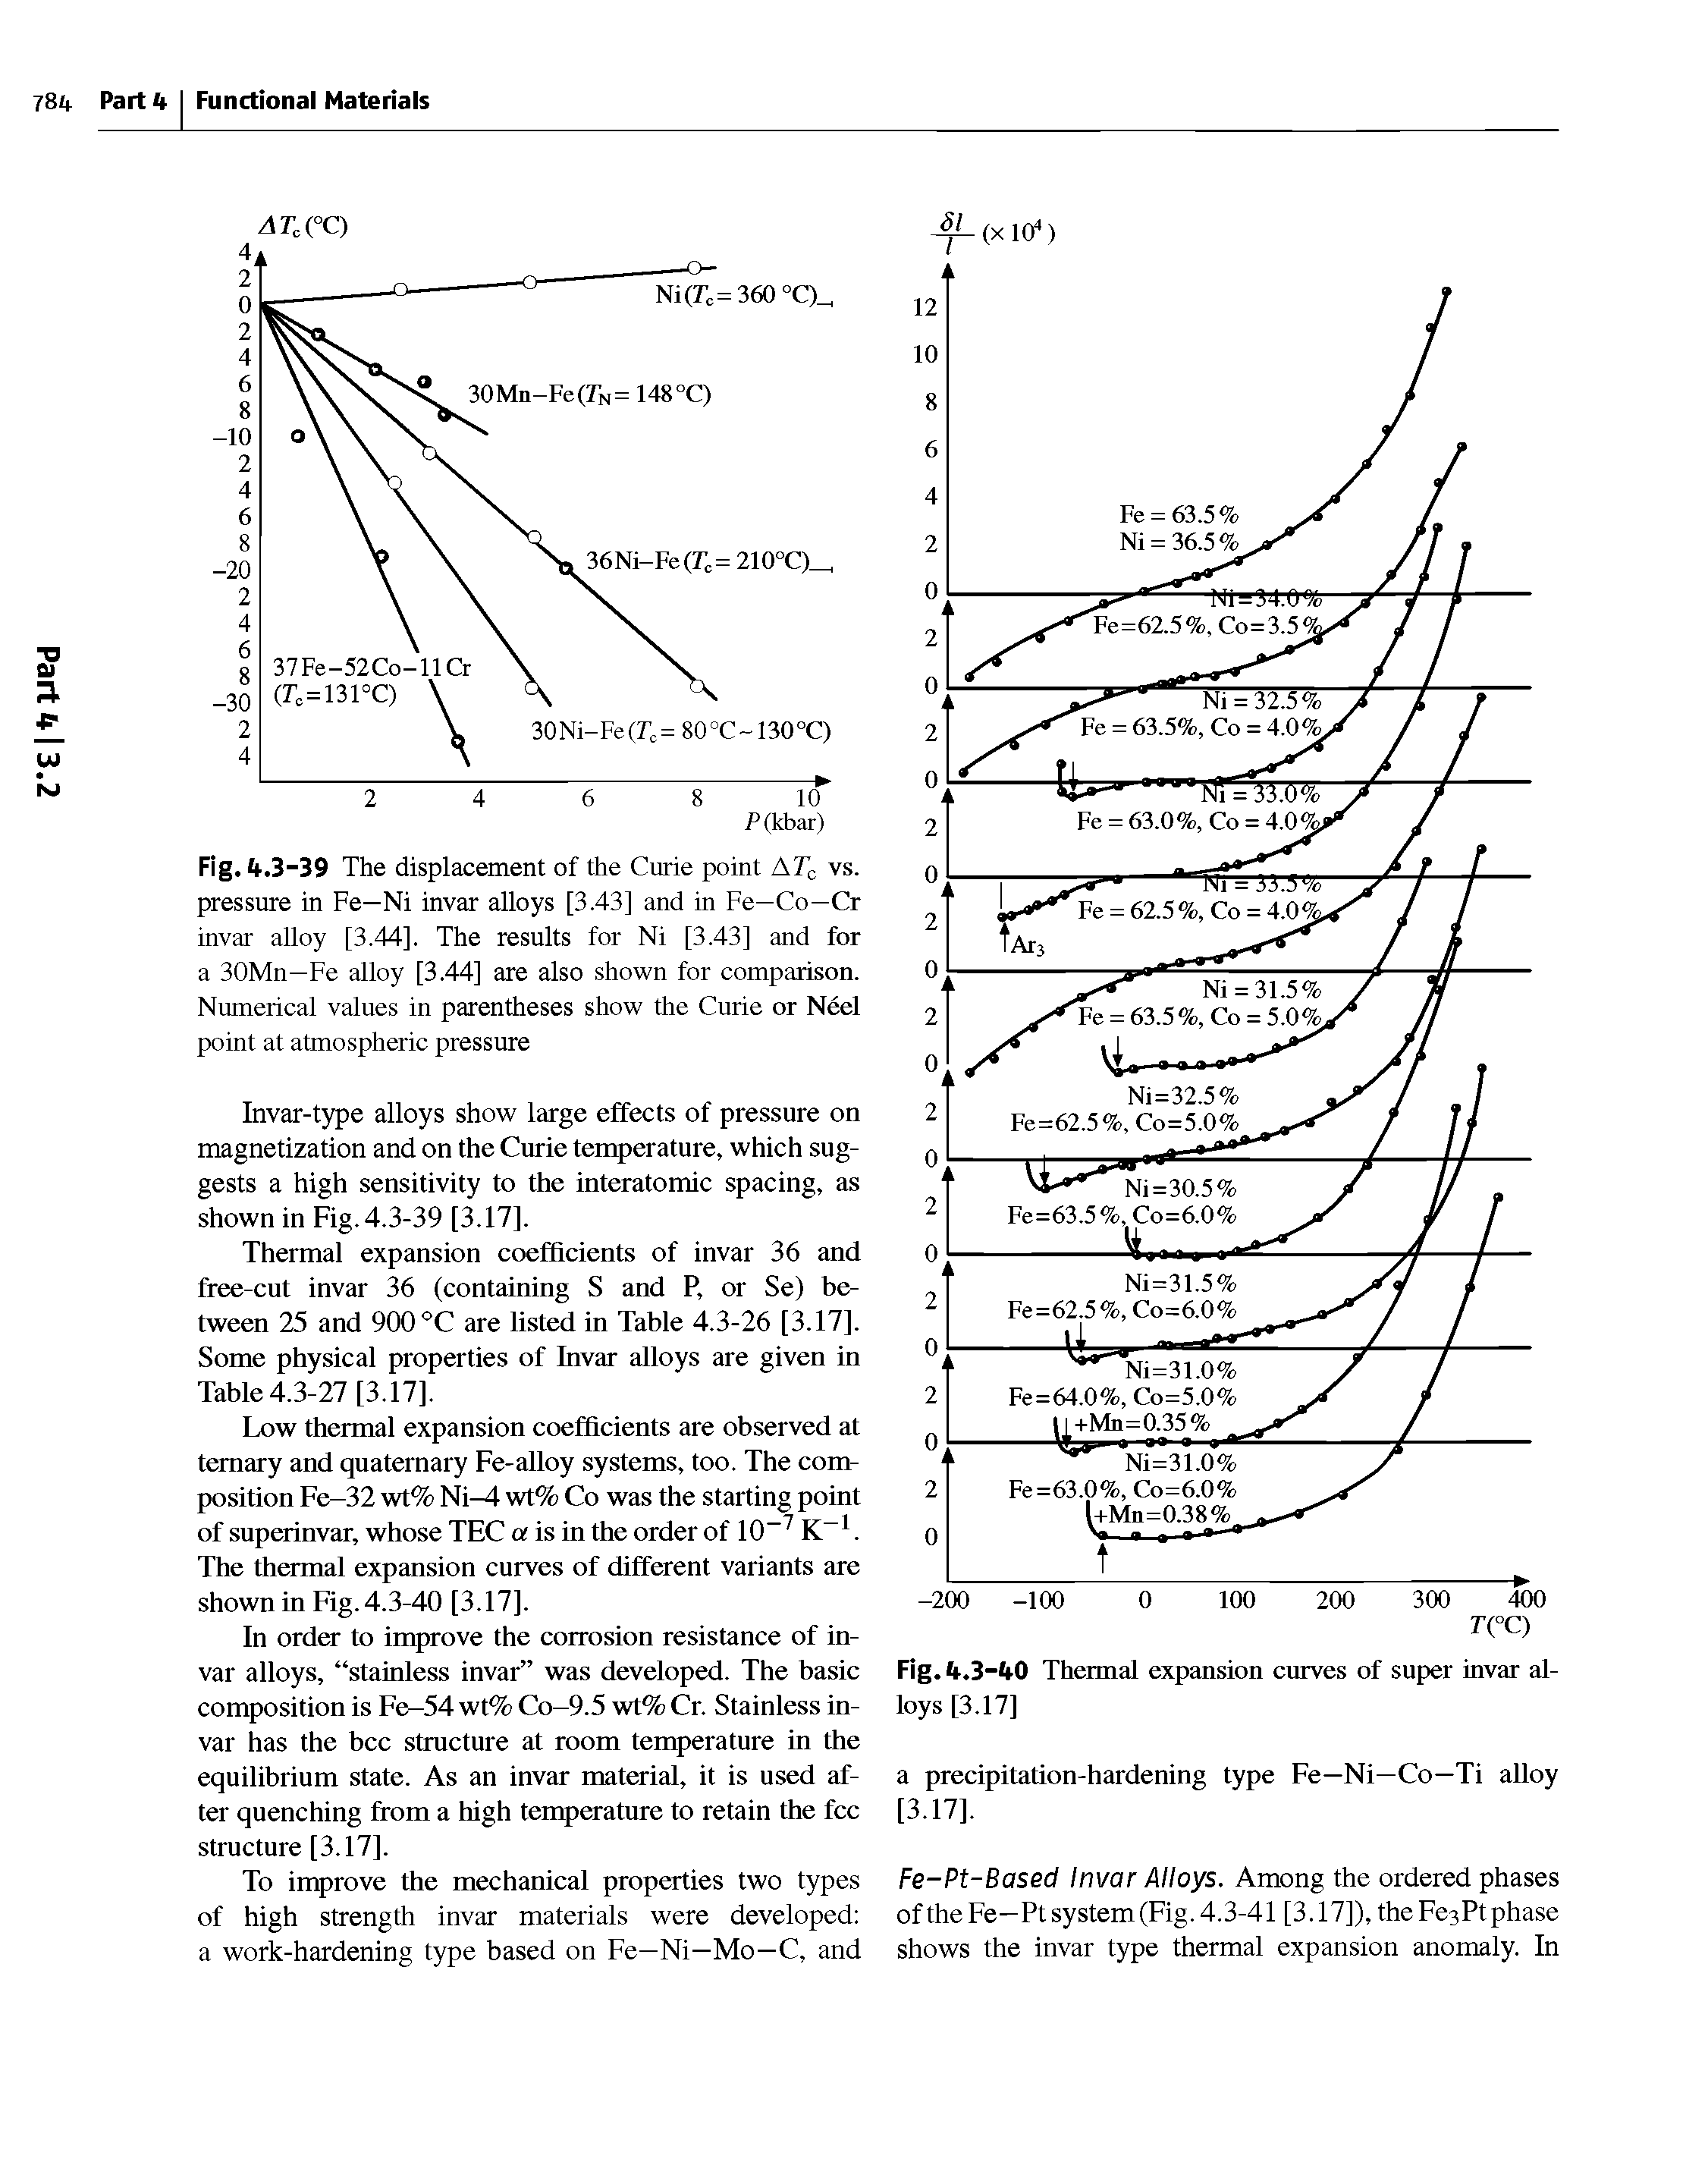 Fig. 4.3-39 The displacement of the Curie point ATc vs. pressure in Fe—Ni invar alloys [3.43] and in Fe—Co—Cr invar alloy [3.44]. The results for Ni [3.43] and for a 30Mn—Fe alloy [3.44] are also shown for comparison. Numerical values in parentheses show the Curie or Neel point at atmospheric pressure...